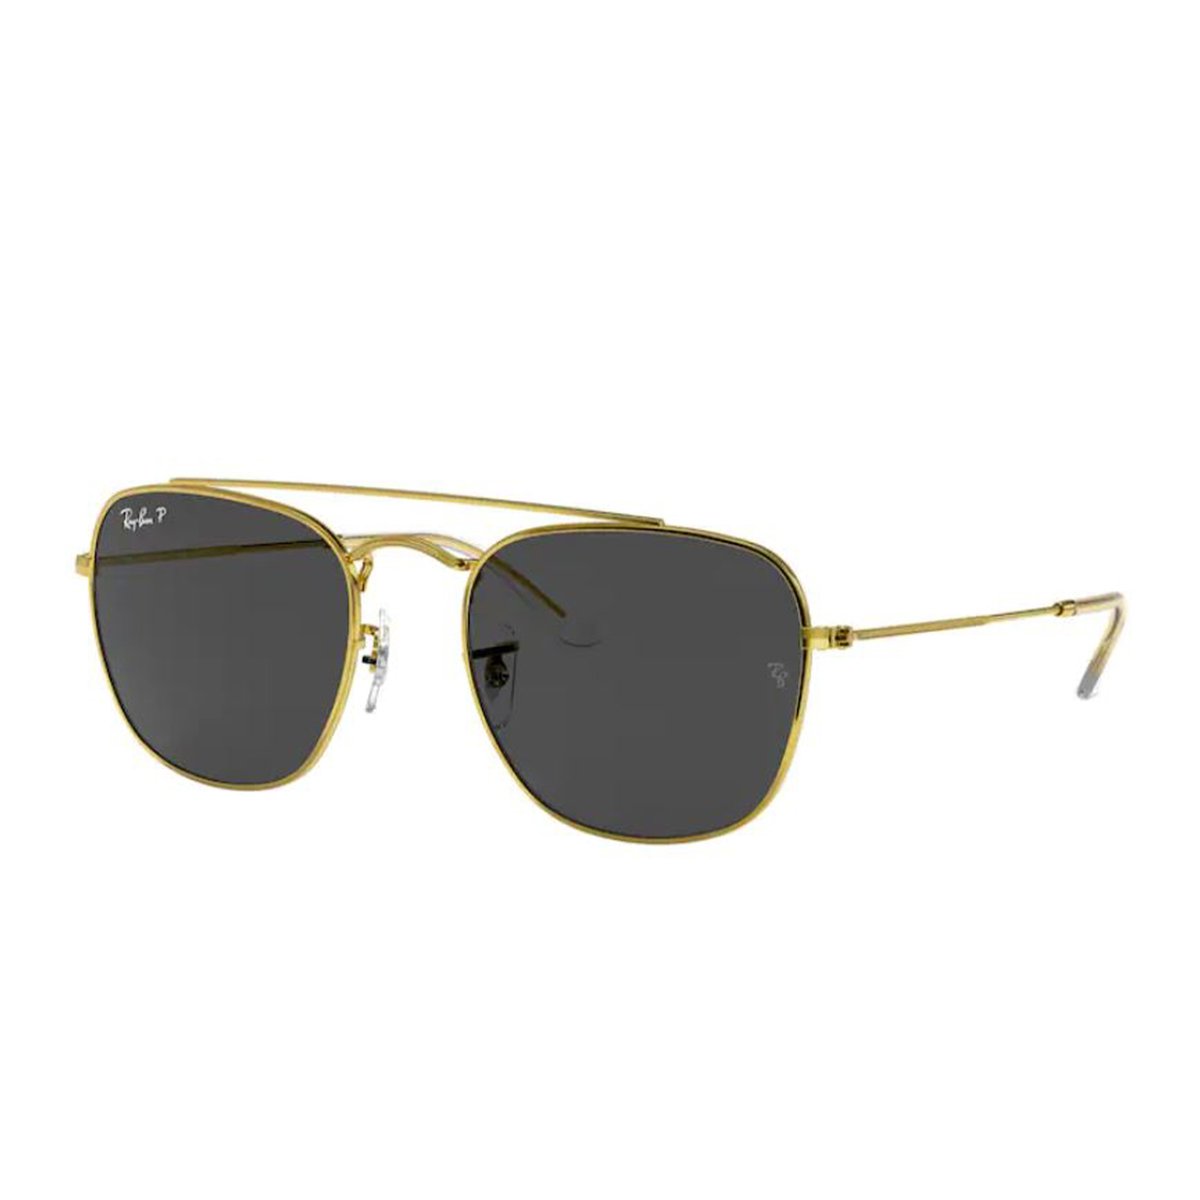 Ray-Ban Men Sunglass 0RB3557 Square Legend Gold